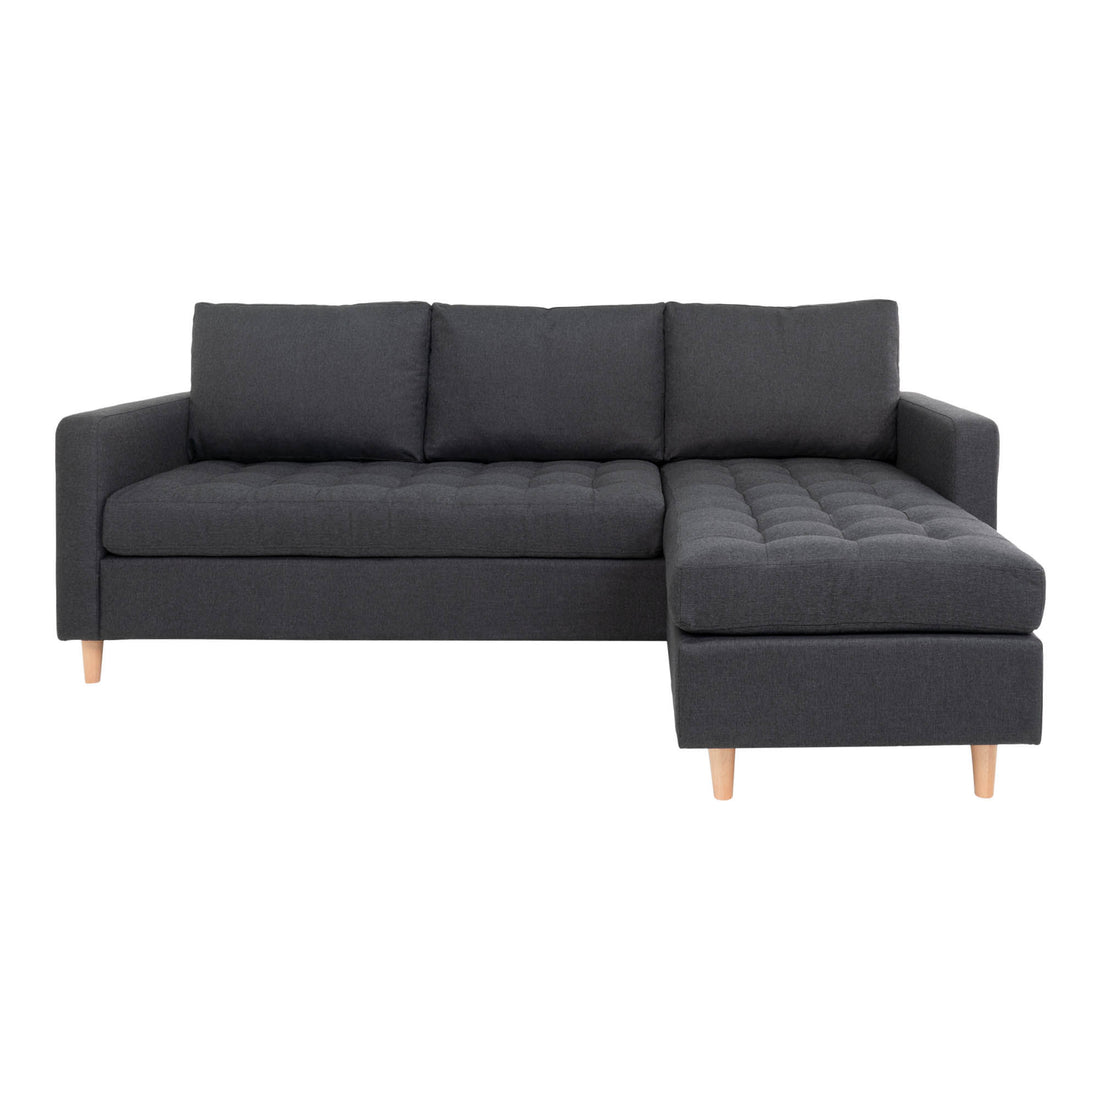 Florence sofa - sofa in dark gray with nature wooden legs, HN1002 - 1 - pcs